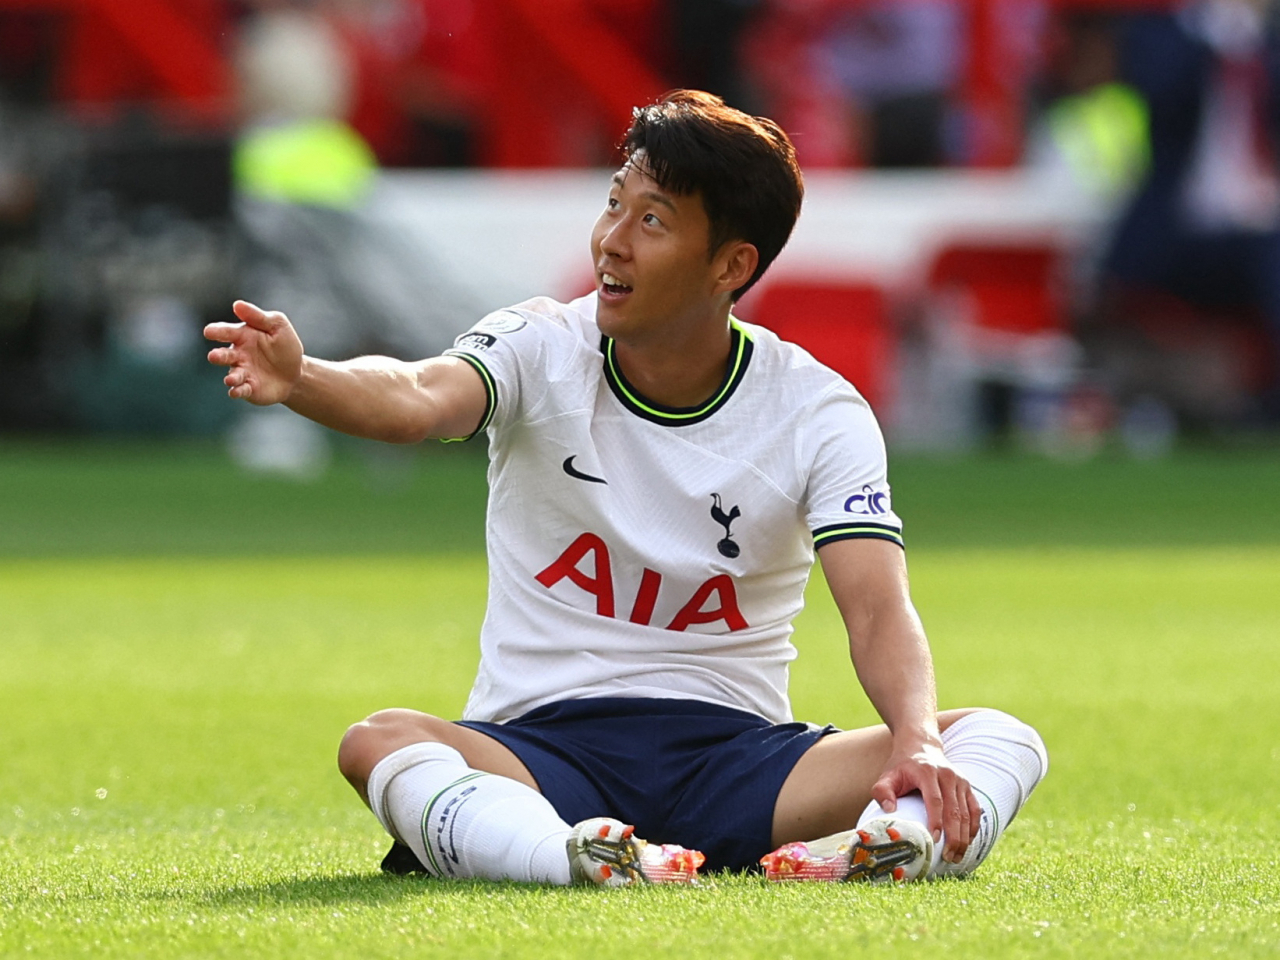 In this Reuters photo, Son Heung-min of Tottenham Hotspur reacts to a play against Nottingham Forest FC during the clubs' Premier League match at The City Ground in Nottingham, England, on Sunday. (Reuters)